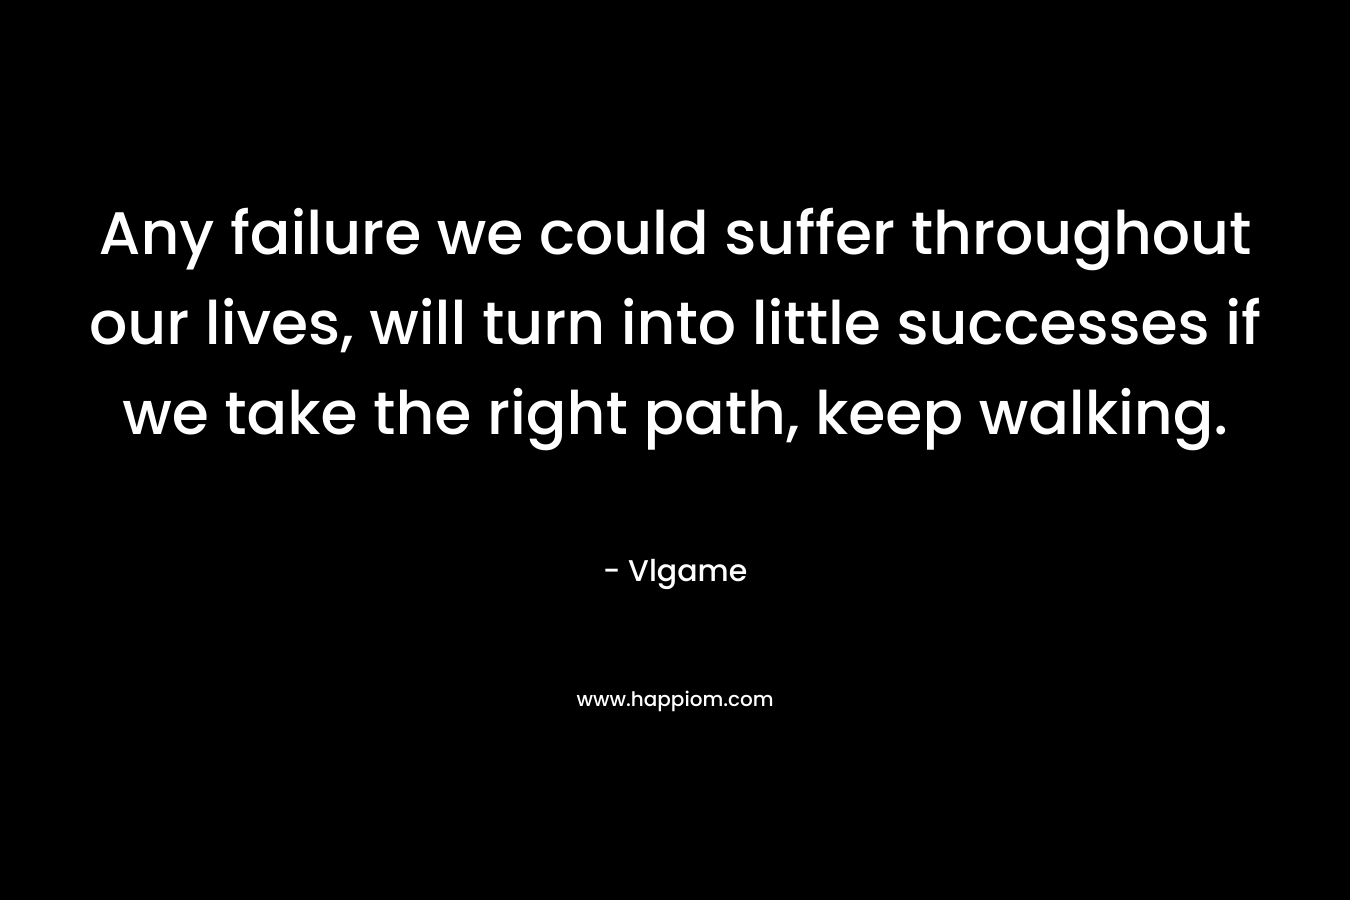 Any failure we could suffer throughout our lives, will turn into little successes if we take the right path, keep walking. – Vlgame